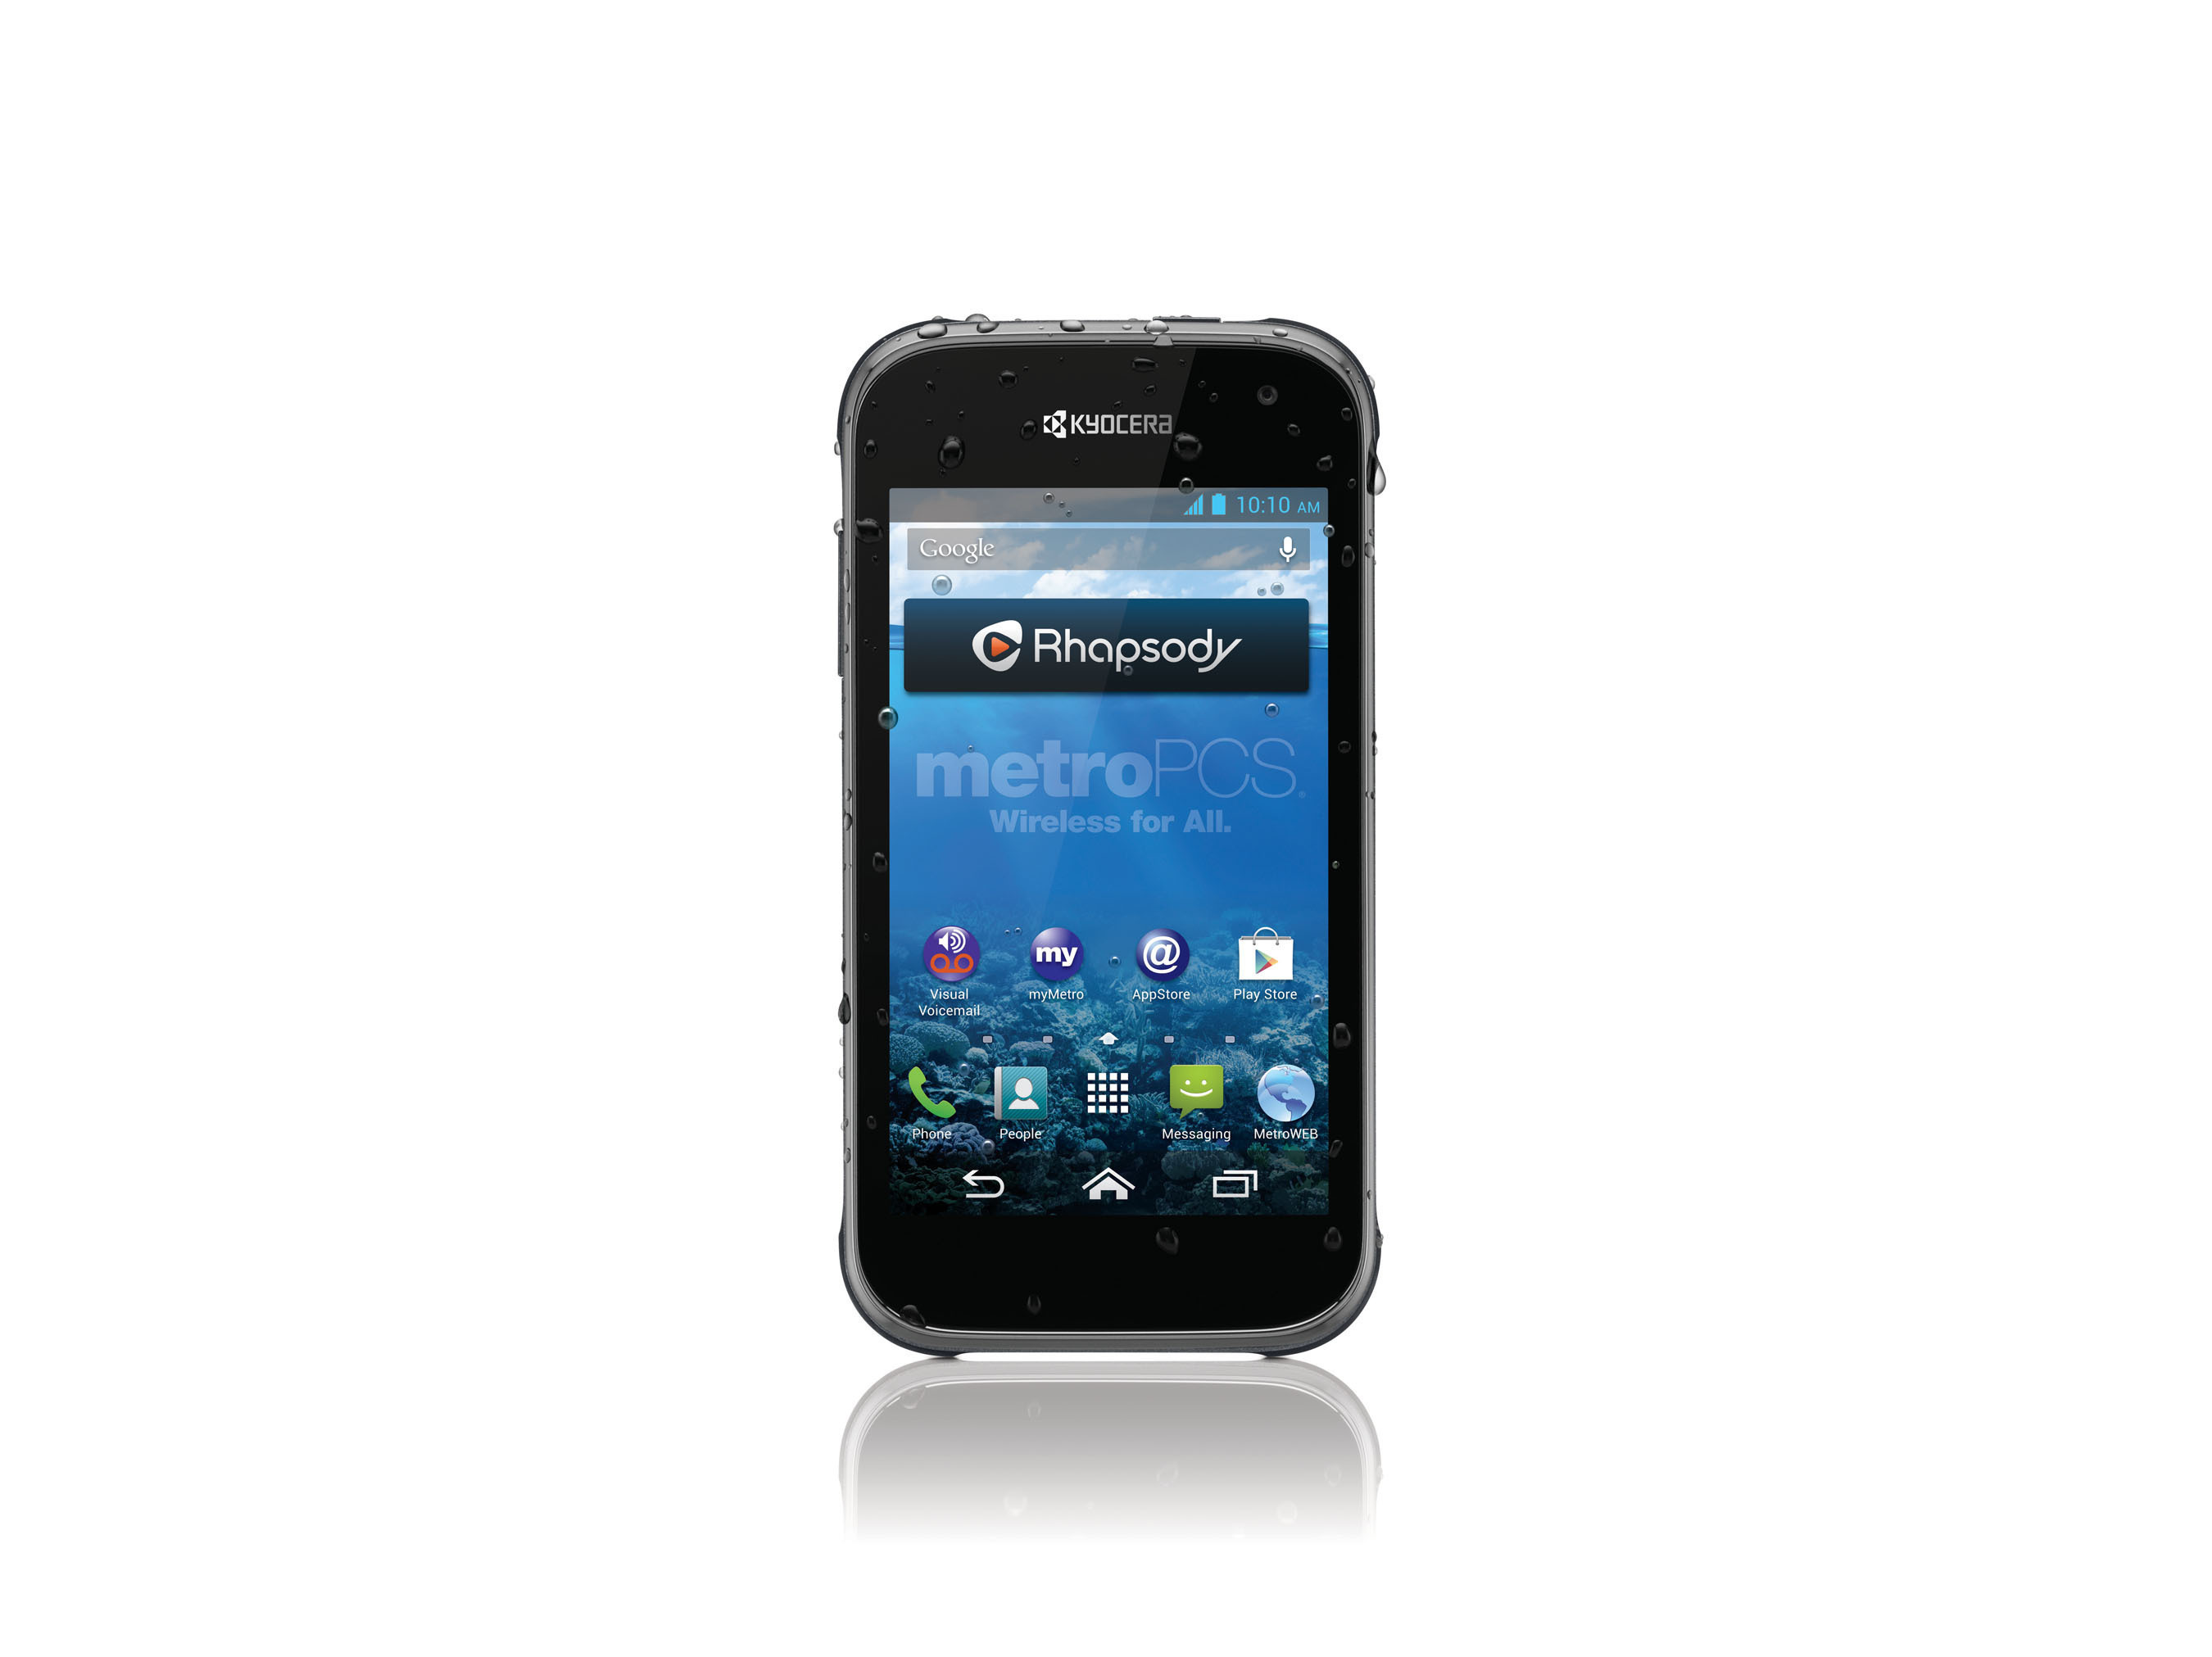 Troubleshooting Kyocera: Performing A Power Reset On Your Waterproof Phone